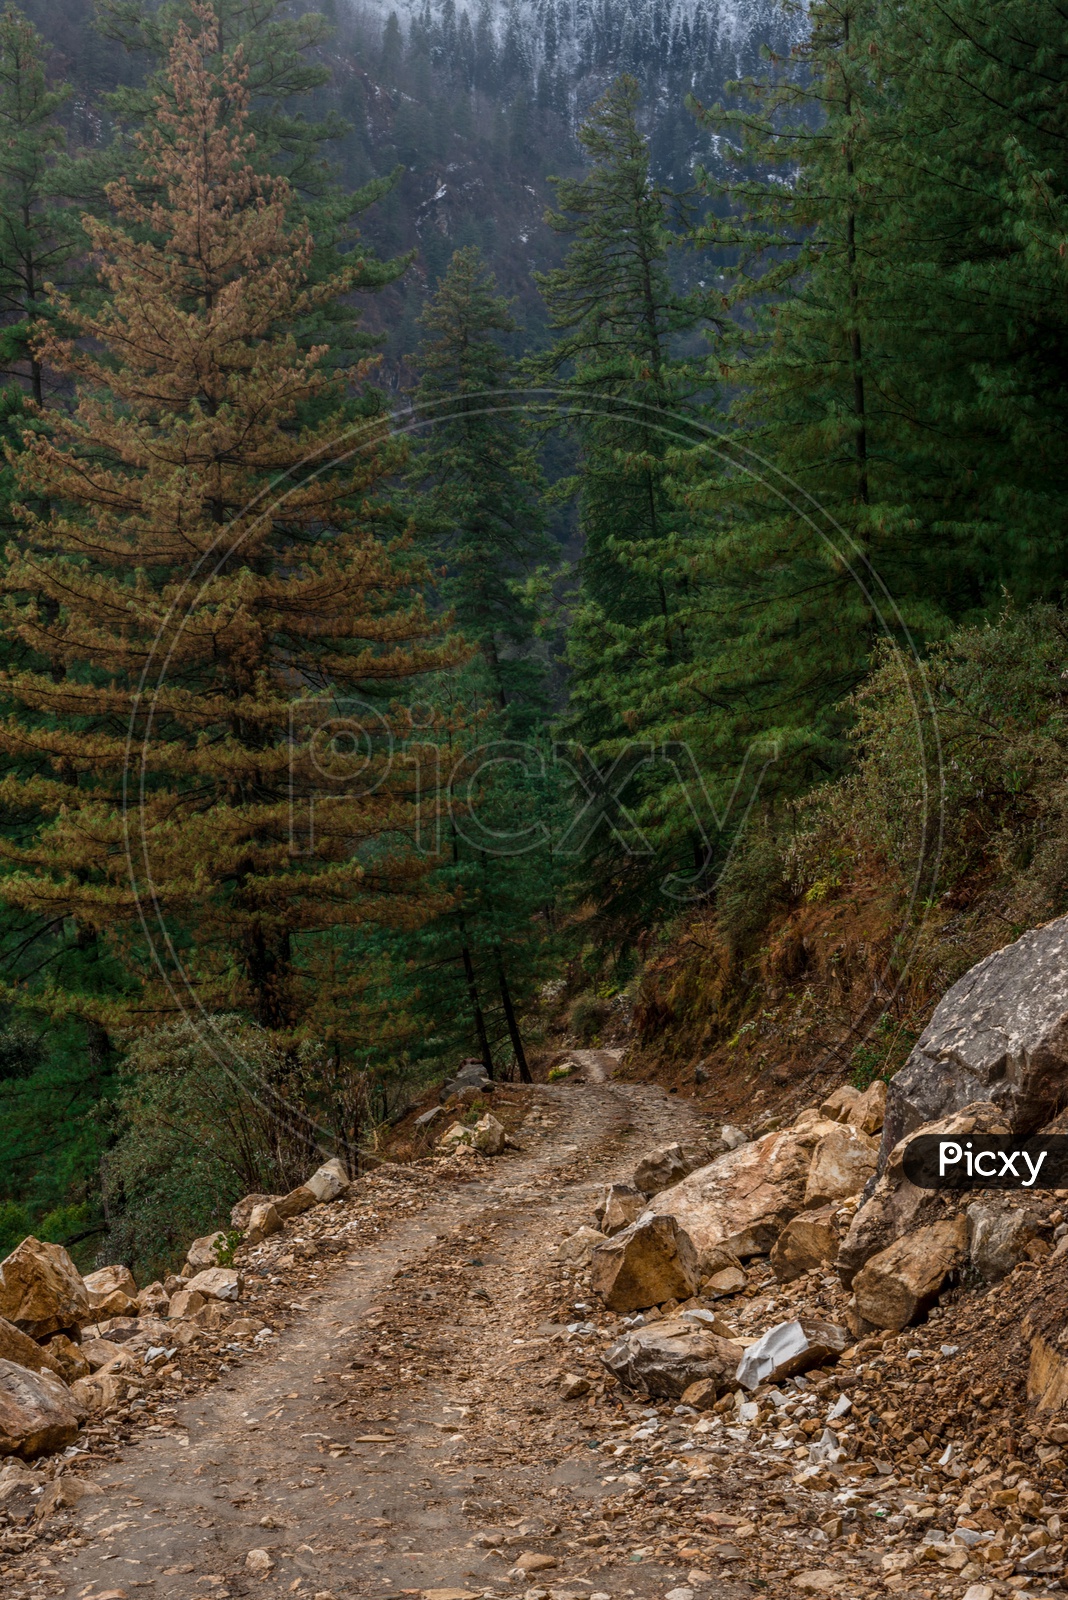 Mud road in the Himalayas surrounded by deodar trees